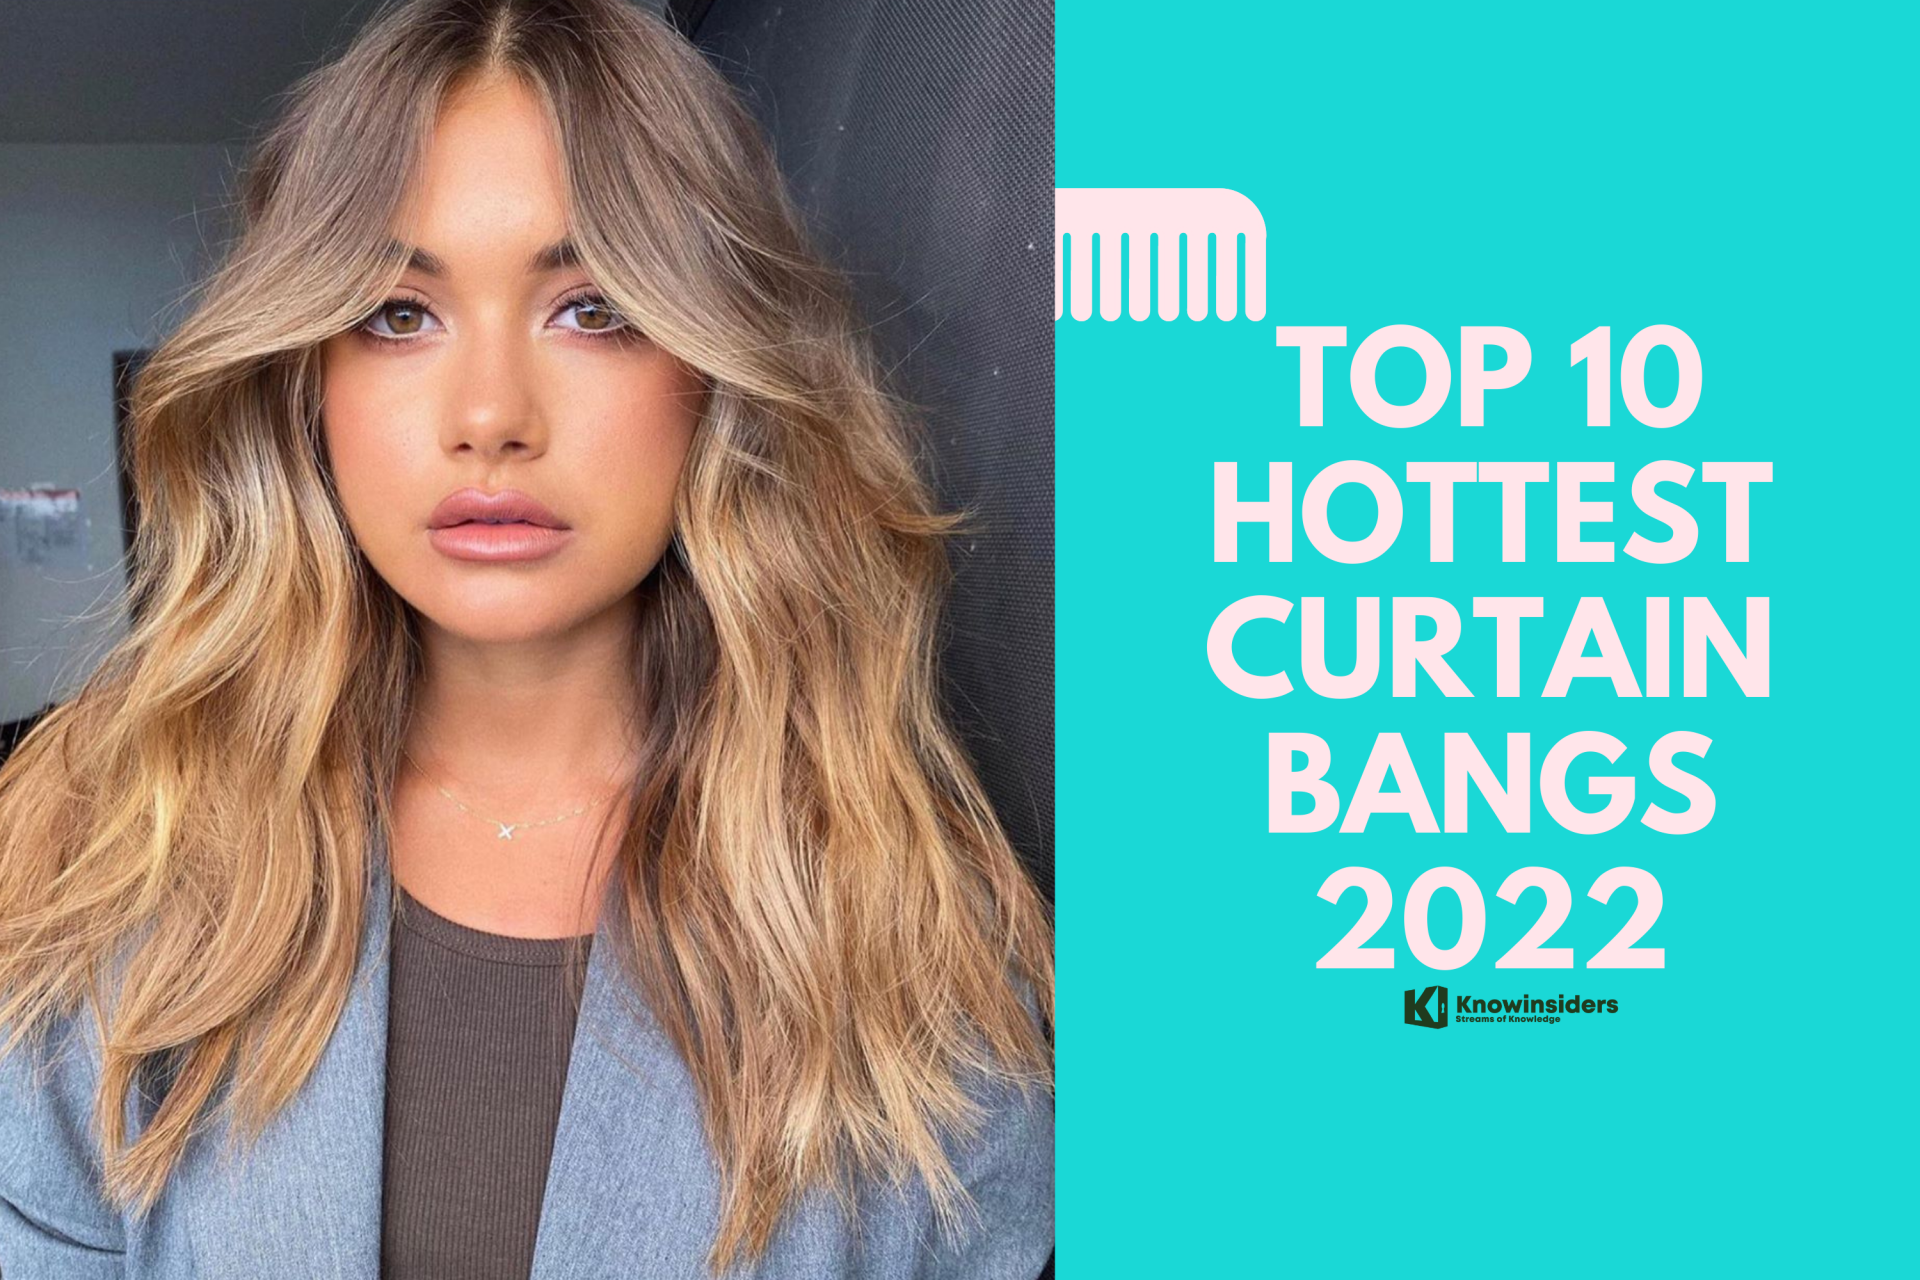 10 Hottest Curtain Bangs 2022 for You to Try